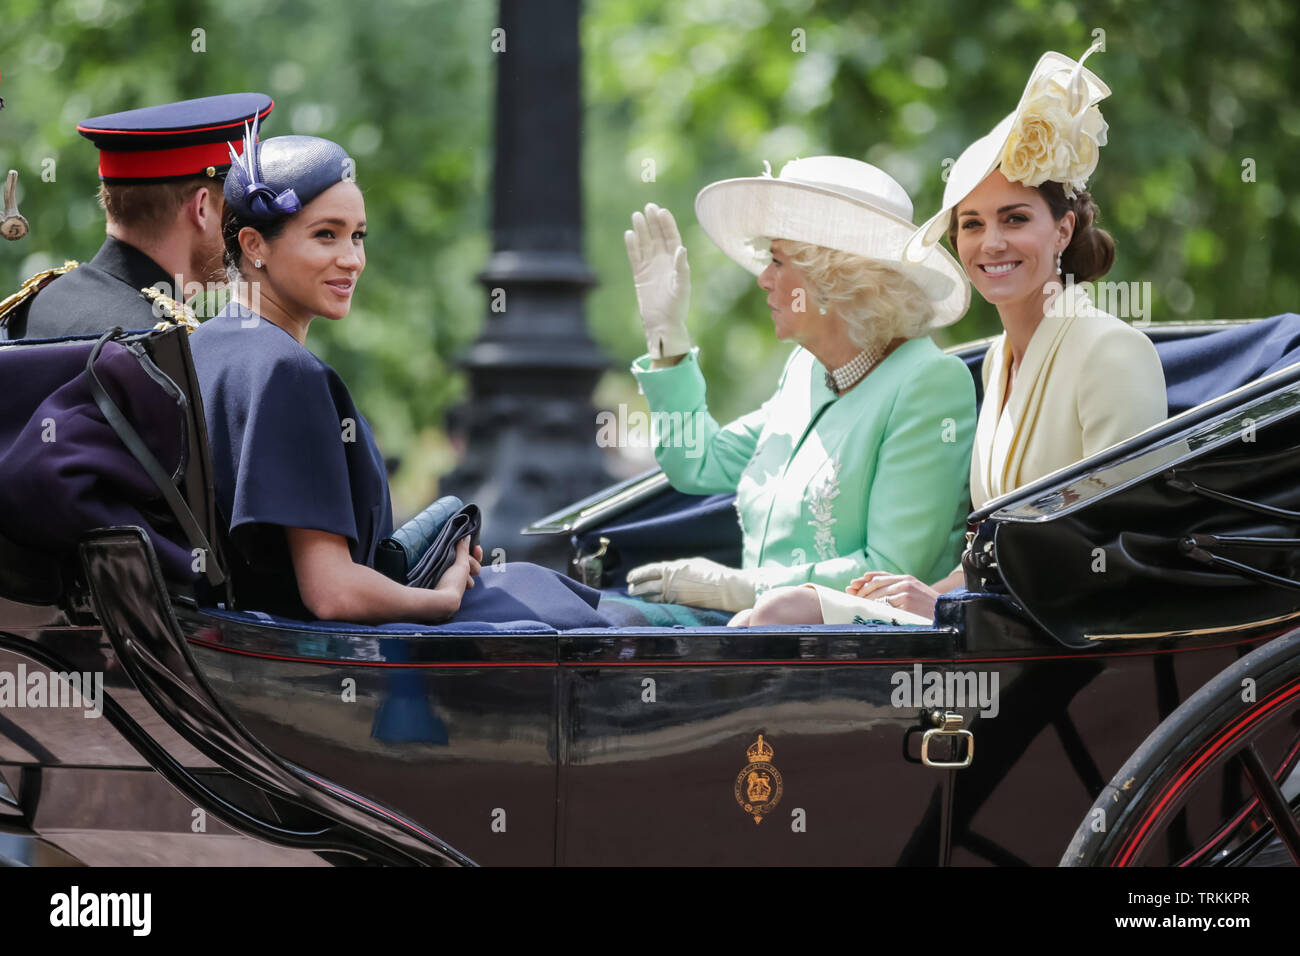 London, UK. 08th June, 2019. HRH Prince Harry, Duke of Sussex, HRH Meghan, Duchess of Sussex, HRH Catherine, Duchess of Cambridge, HRH Camilla, Duchess of Cornwall, share an open top carriage along The Mall. Trooping the Colour, The Queen's Birthday Parade, London UK Credit: amanda rose/Alamy Live News Credit: amanda rose/Alamy Live News Stock Photo